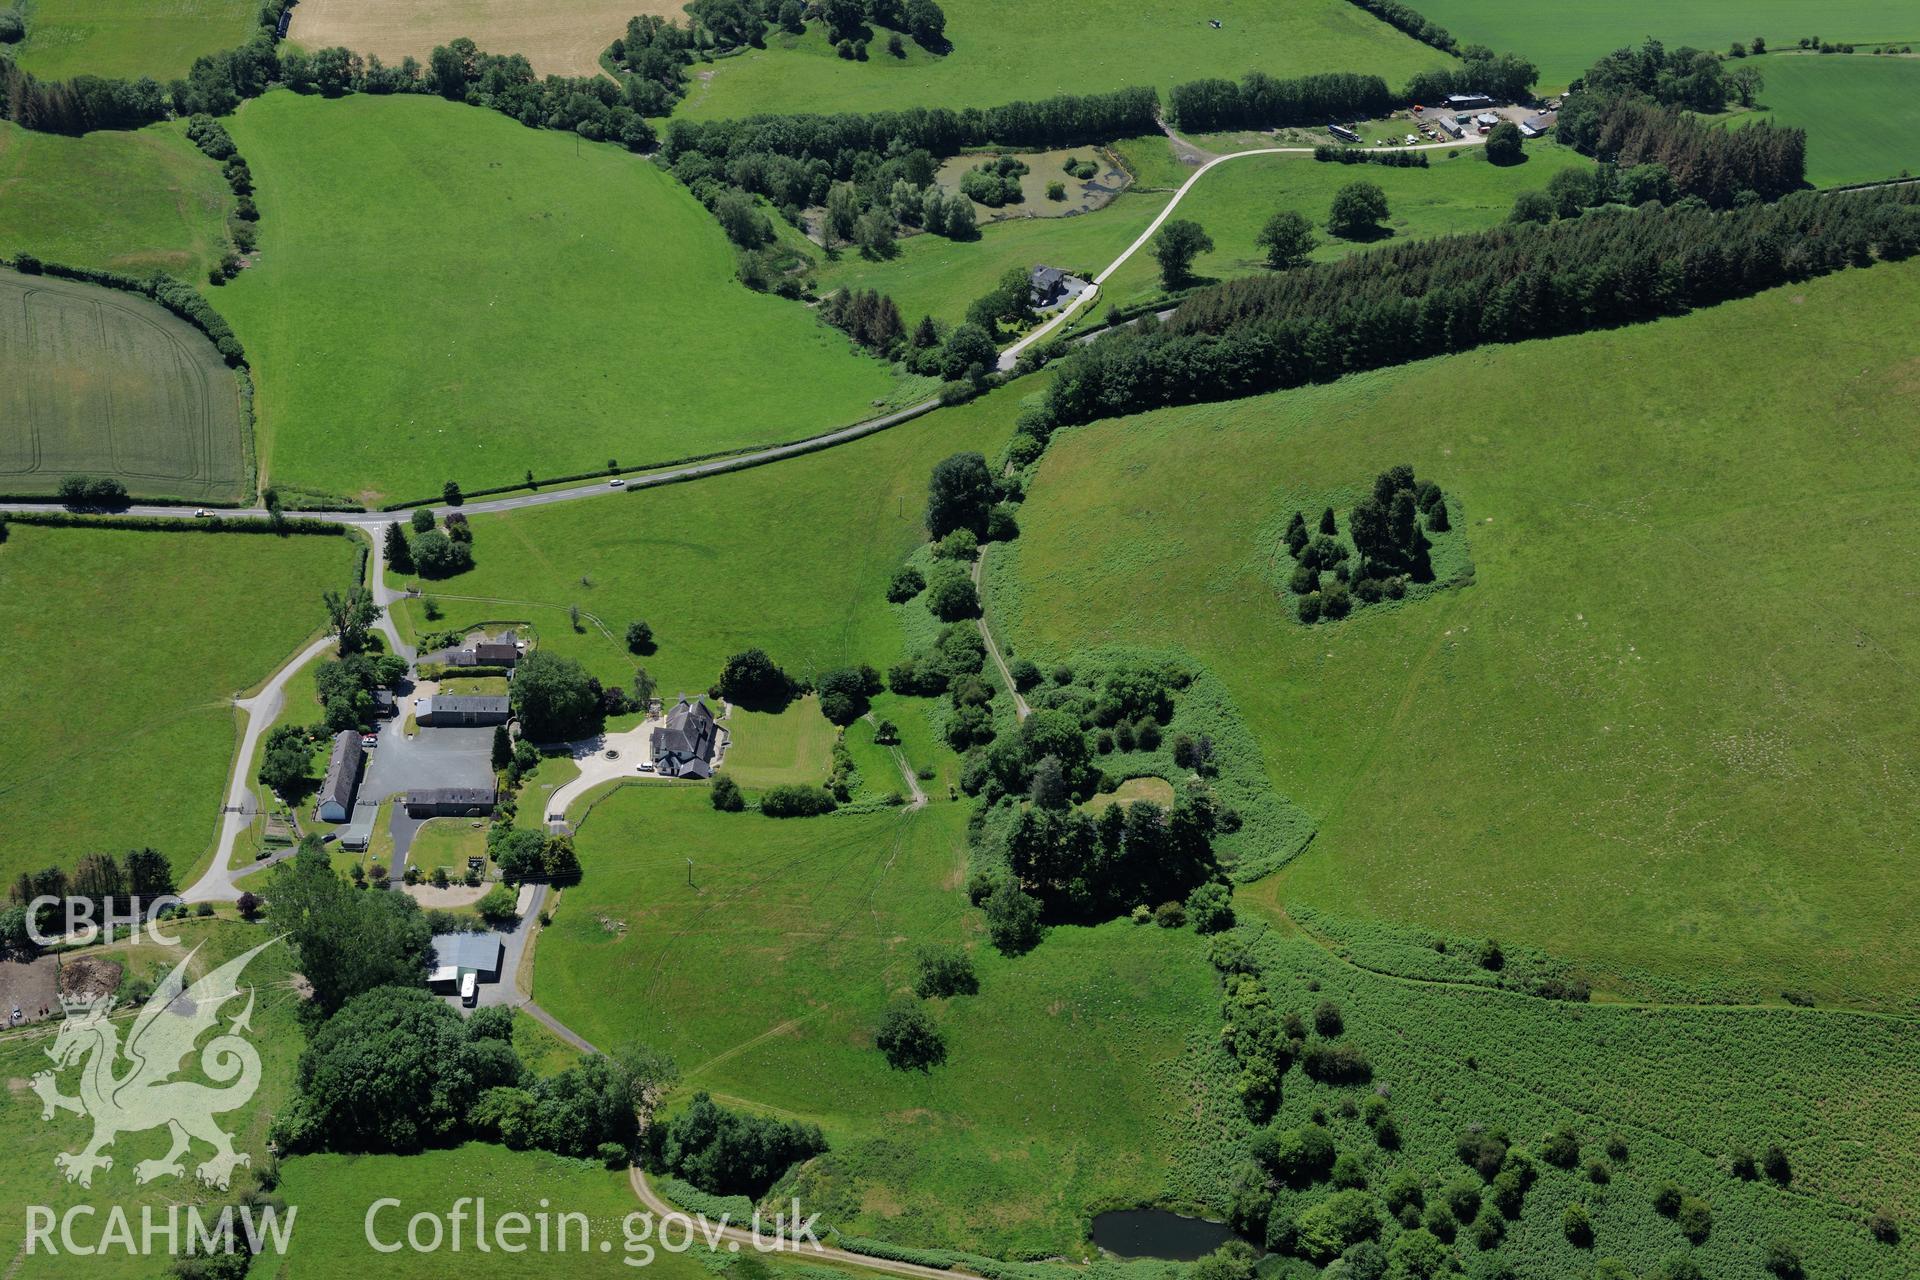 Pilleth Court, the associated farm complex and buildings. Site of the battle at Bryn Glas also visible. Oblique aerial photograph taken during the Royal Commission's programme of archaeological aerial reconnaissance by Toby Driver on 30th June 2015.